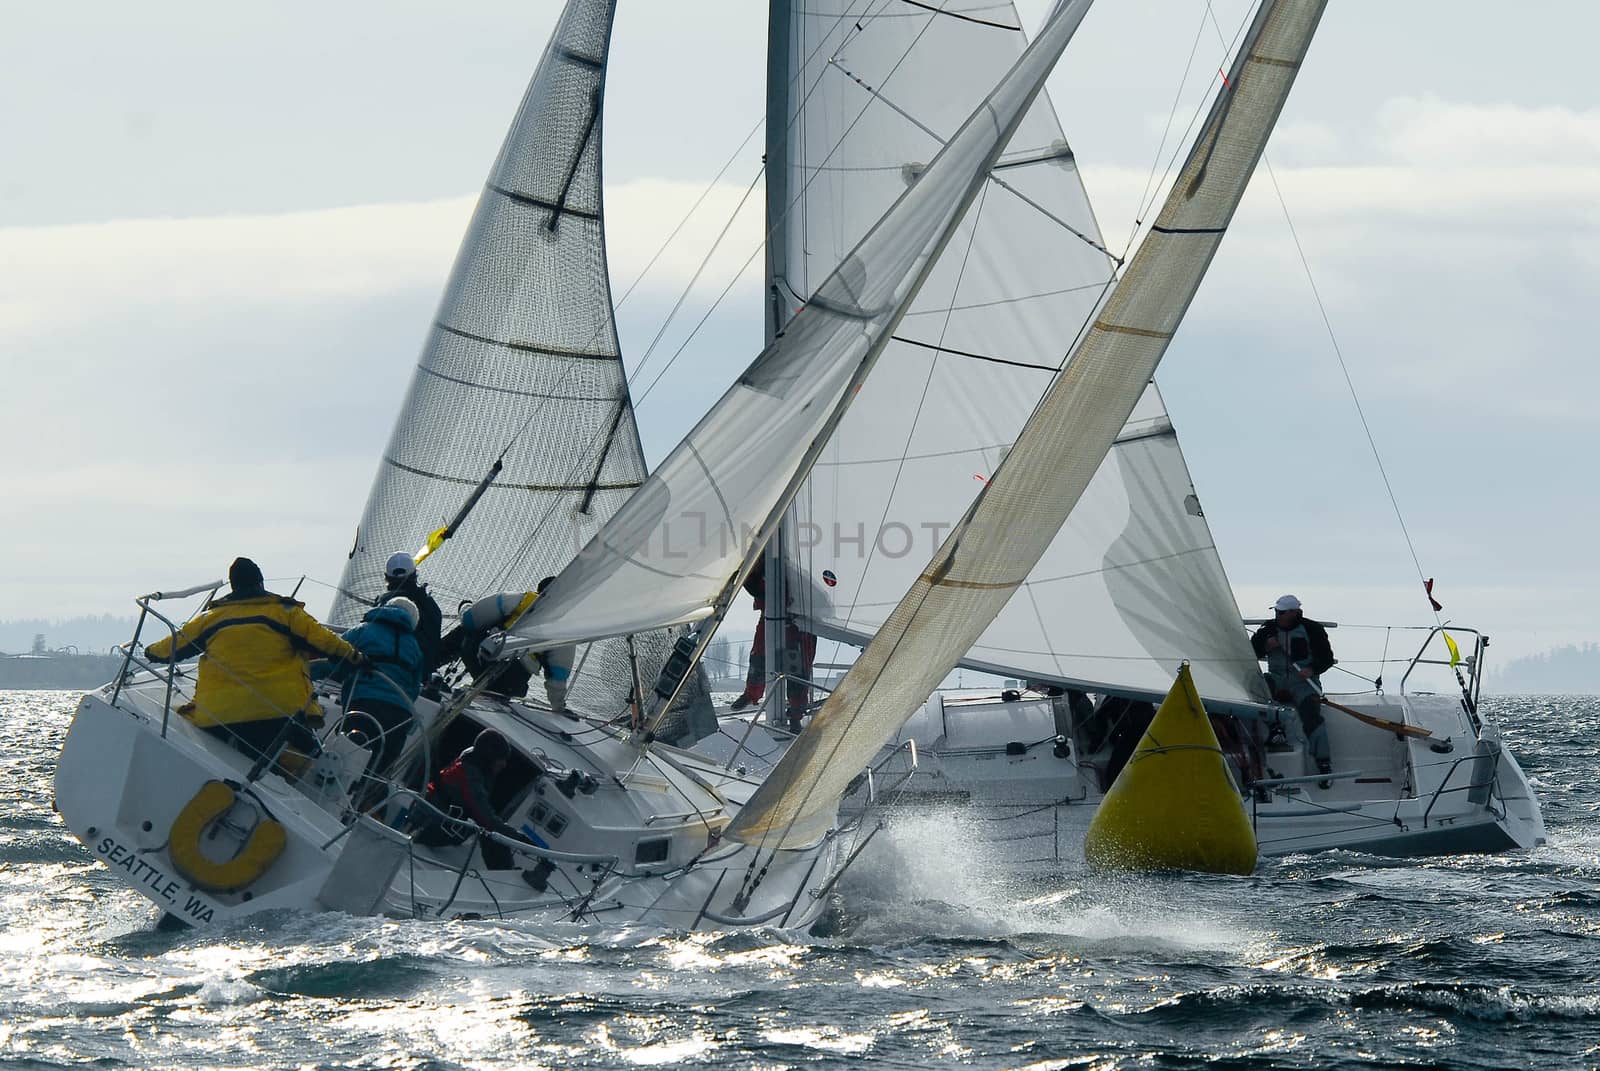 Salinig Races in the Pacific Northwest USA